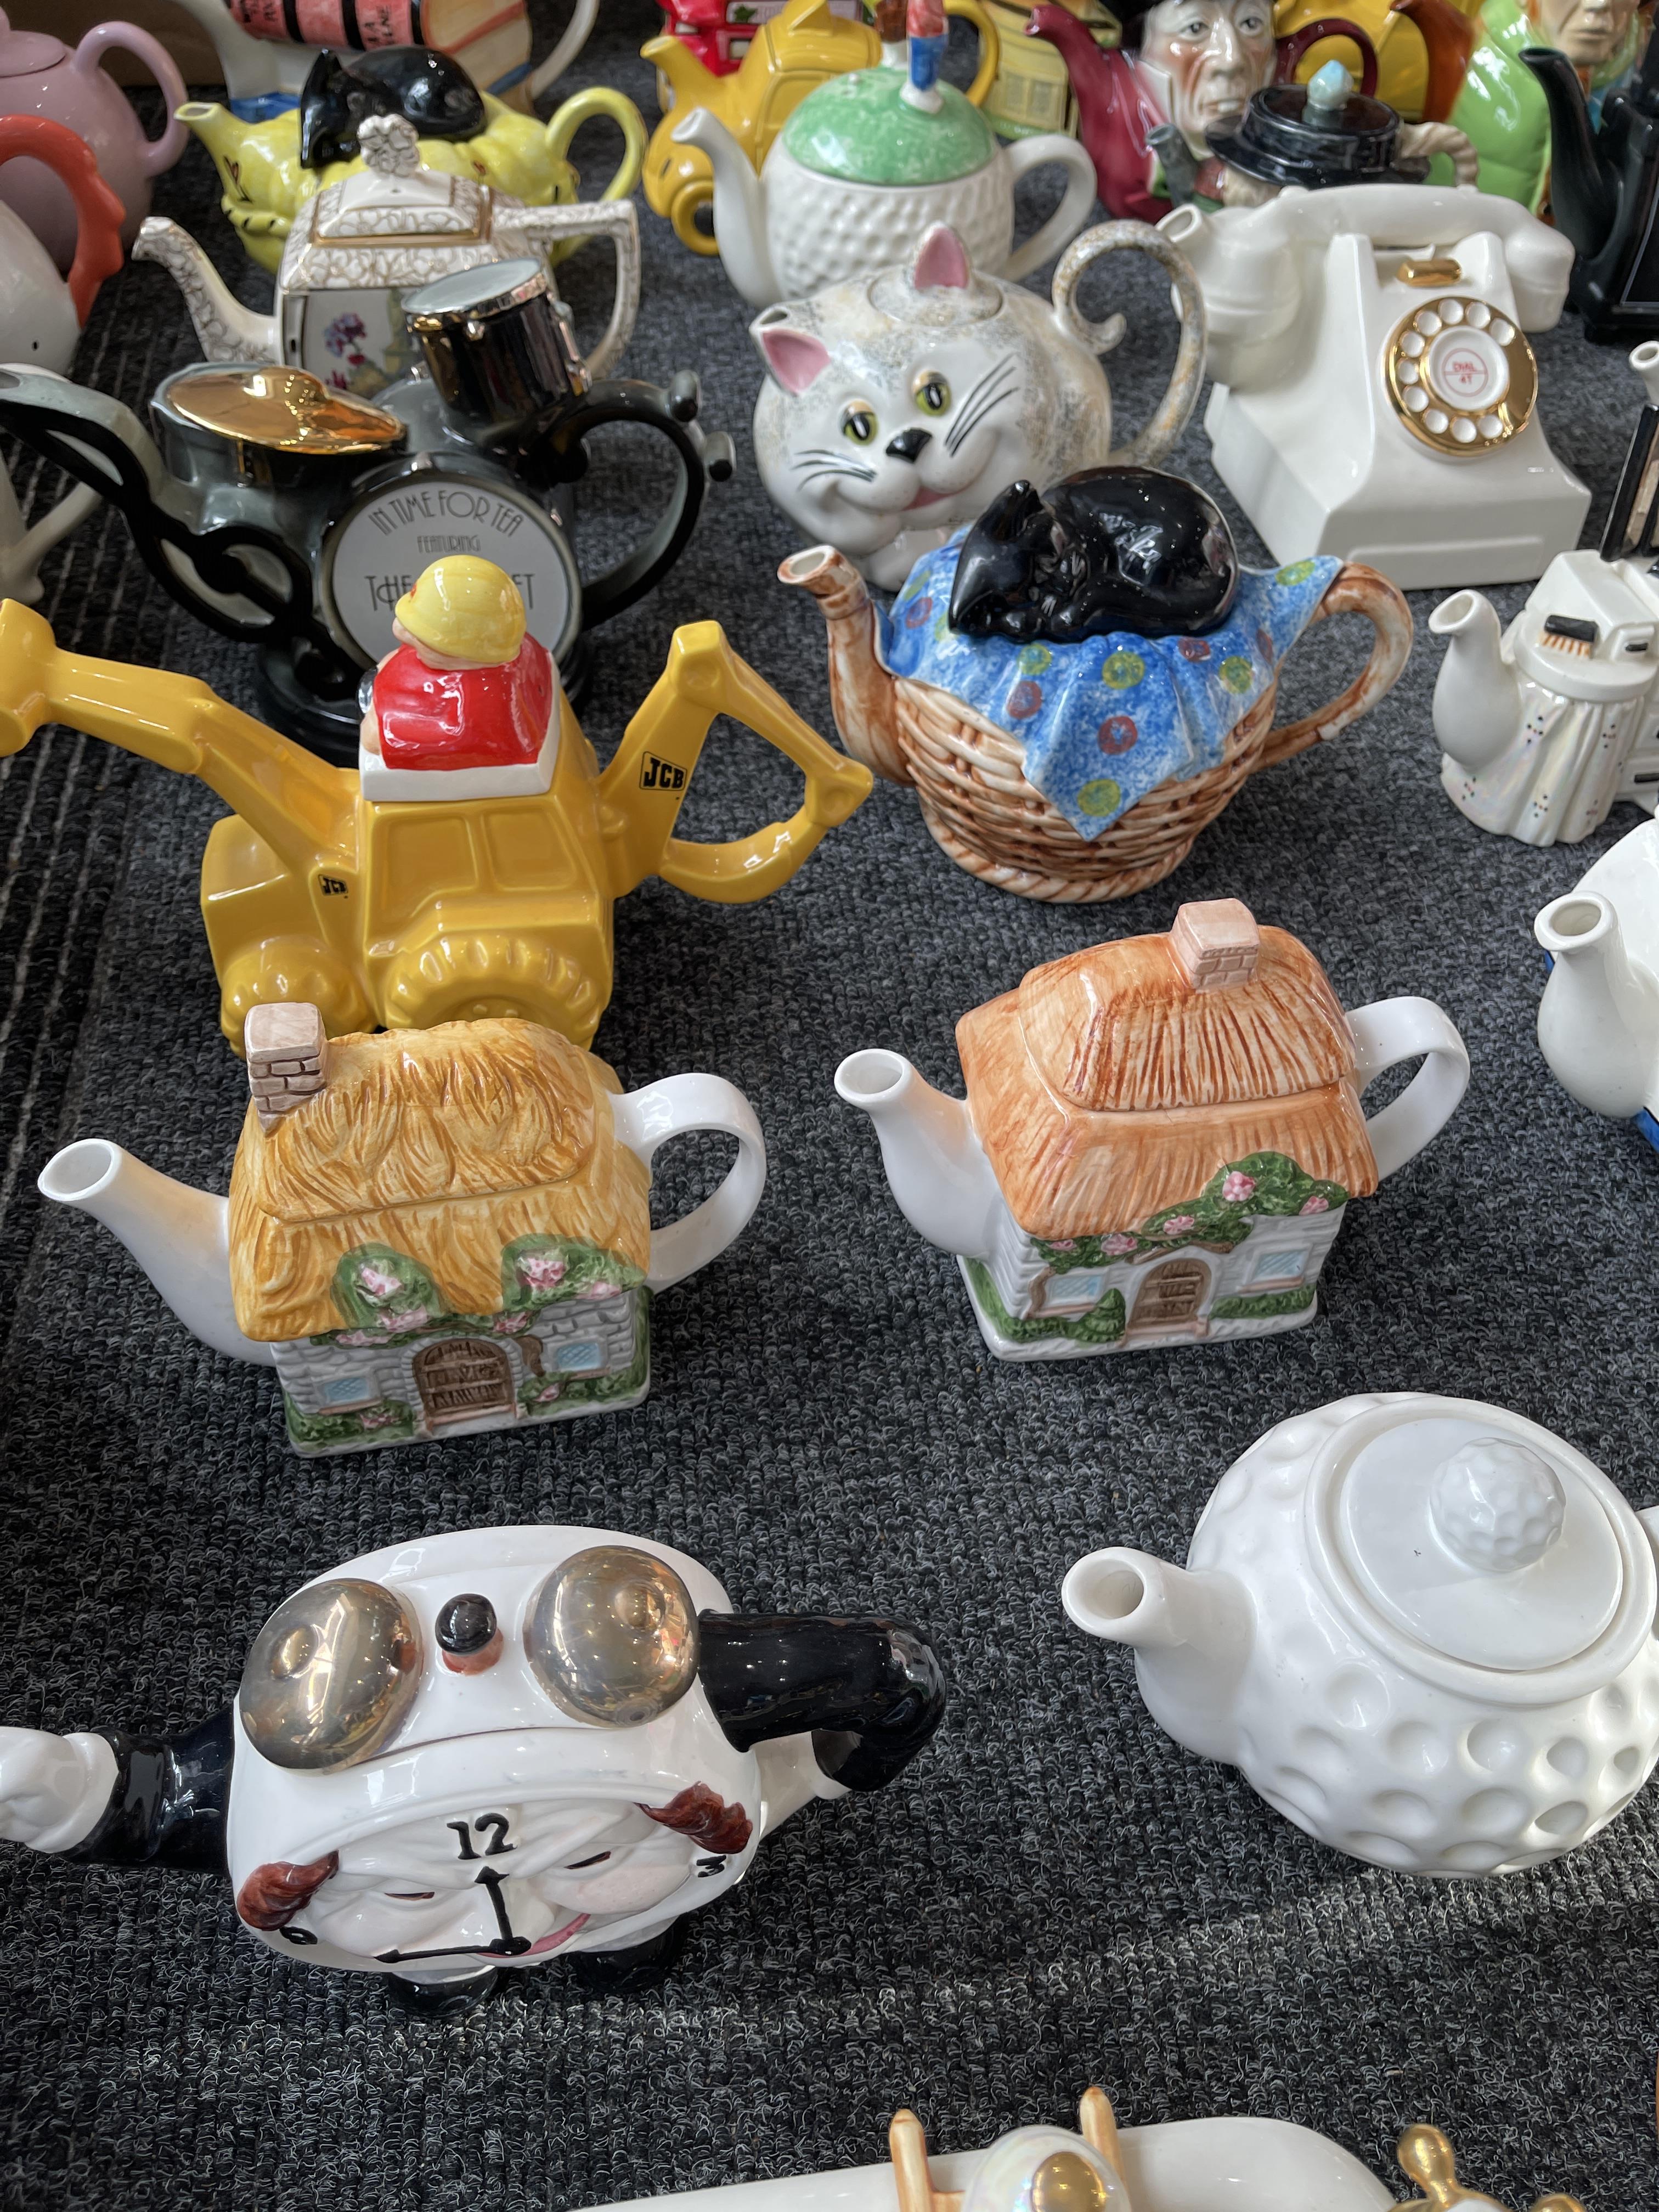 Collection of Ceramic Tea Pots - Image 35 of 44